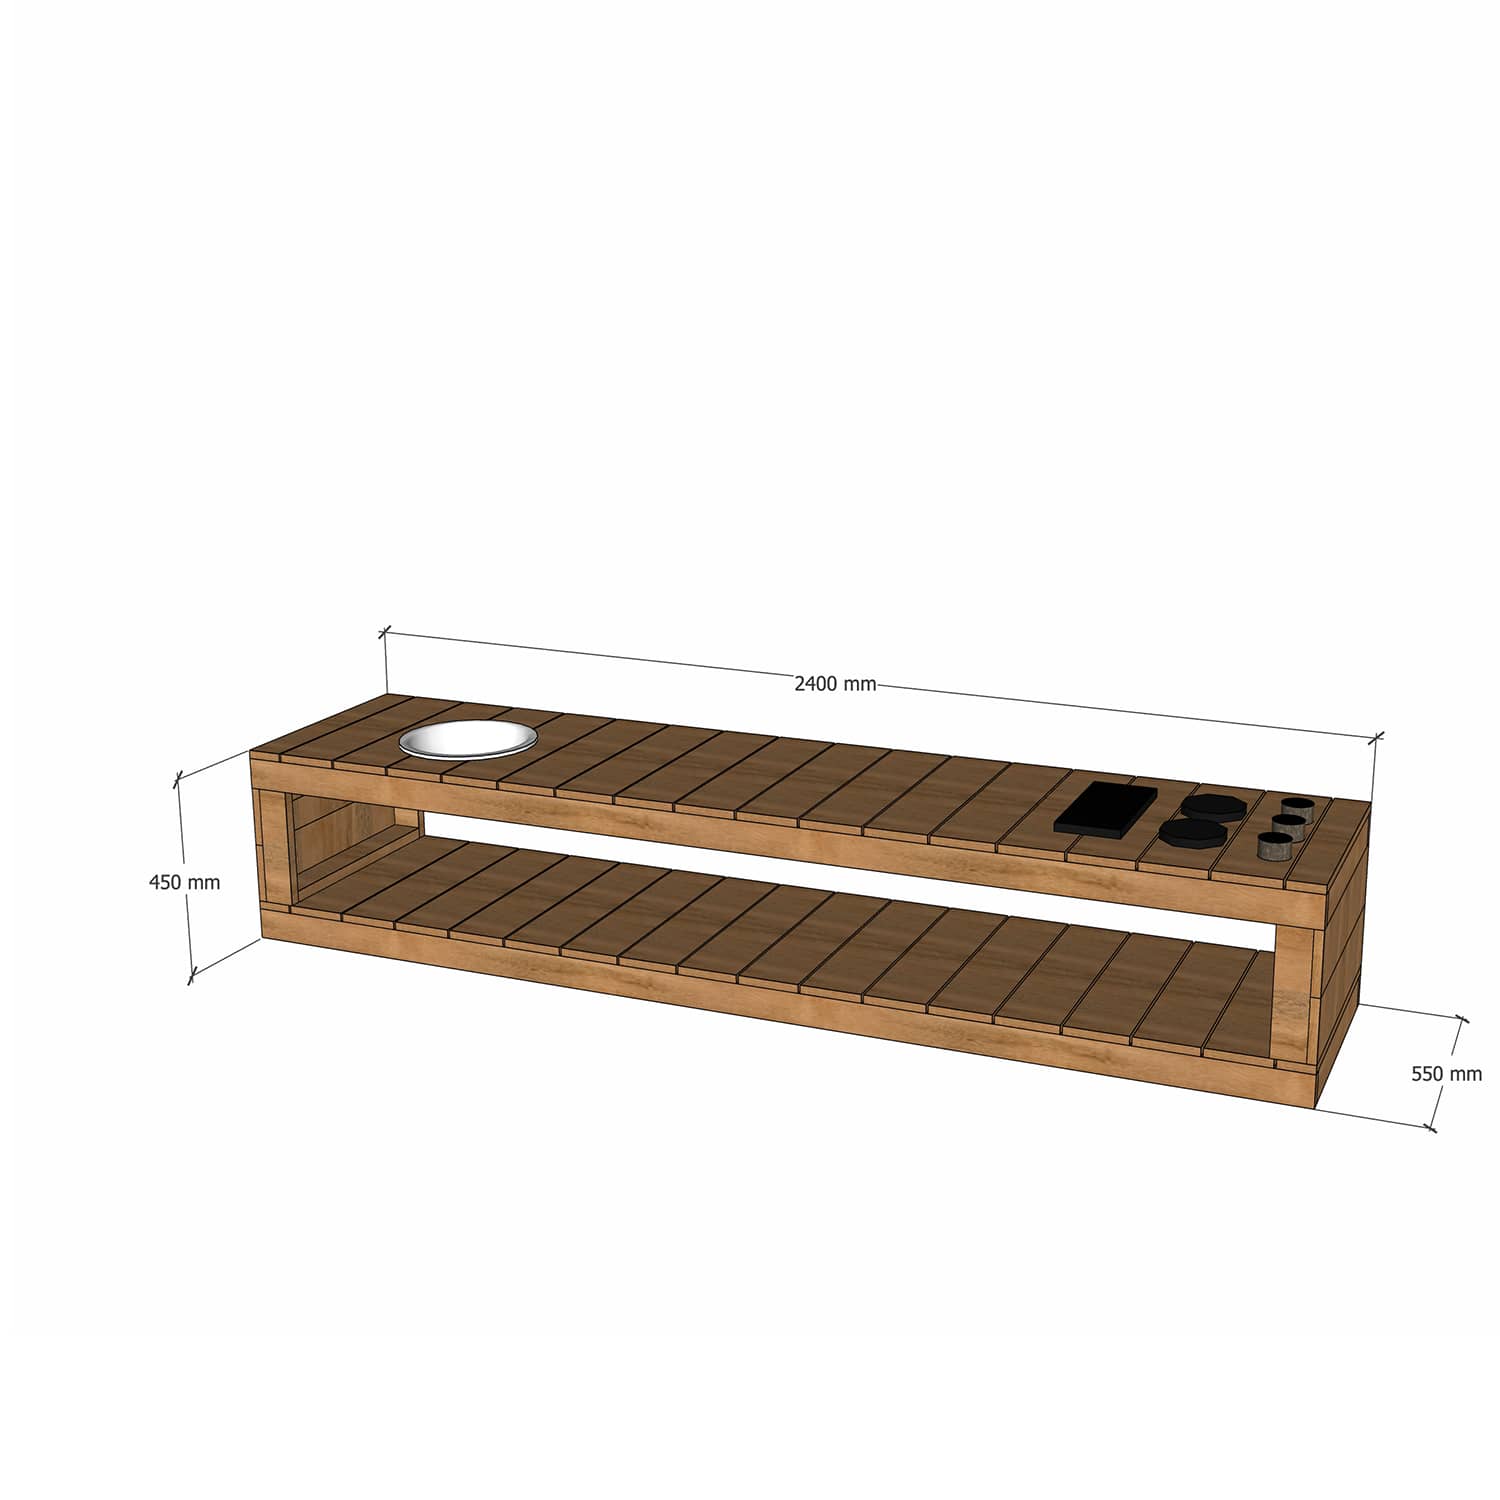 Thermory mud kitchen 2400mm wide and 450mm bench height